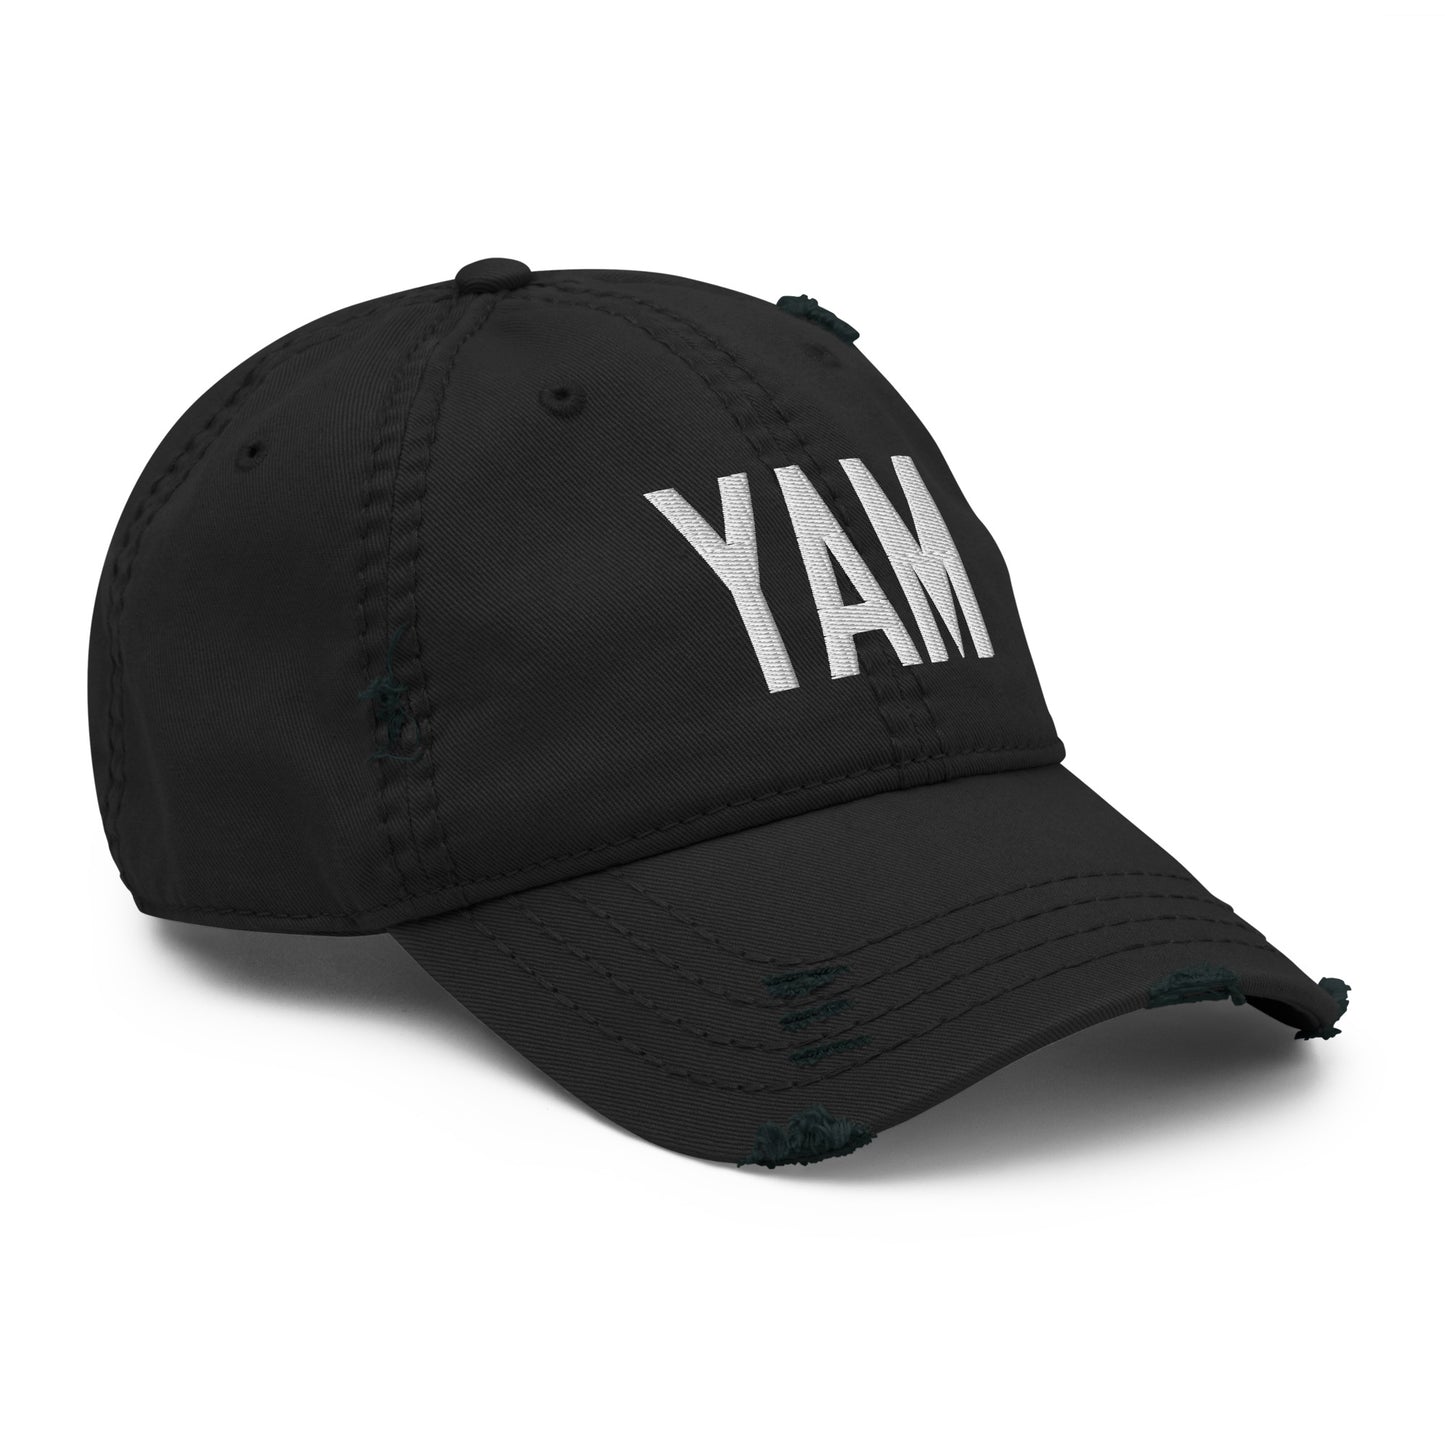 Airport Code Distressed Hat - White • YAM Sault-Ste-Marie • YHM Designs - Image 12